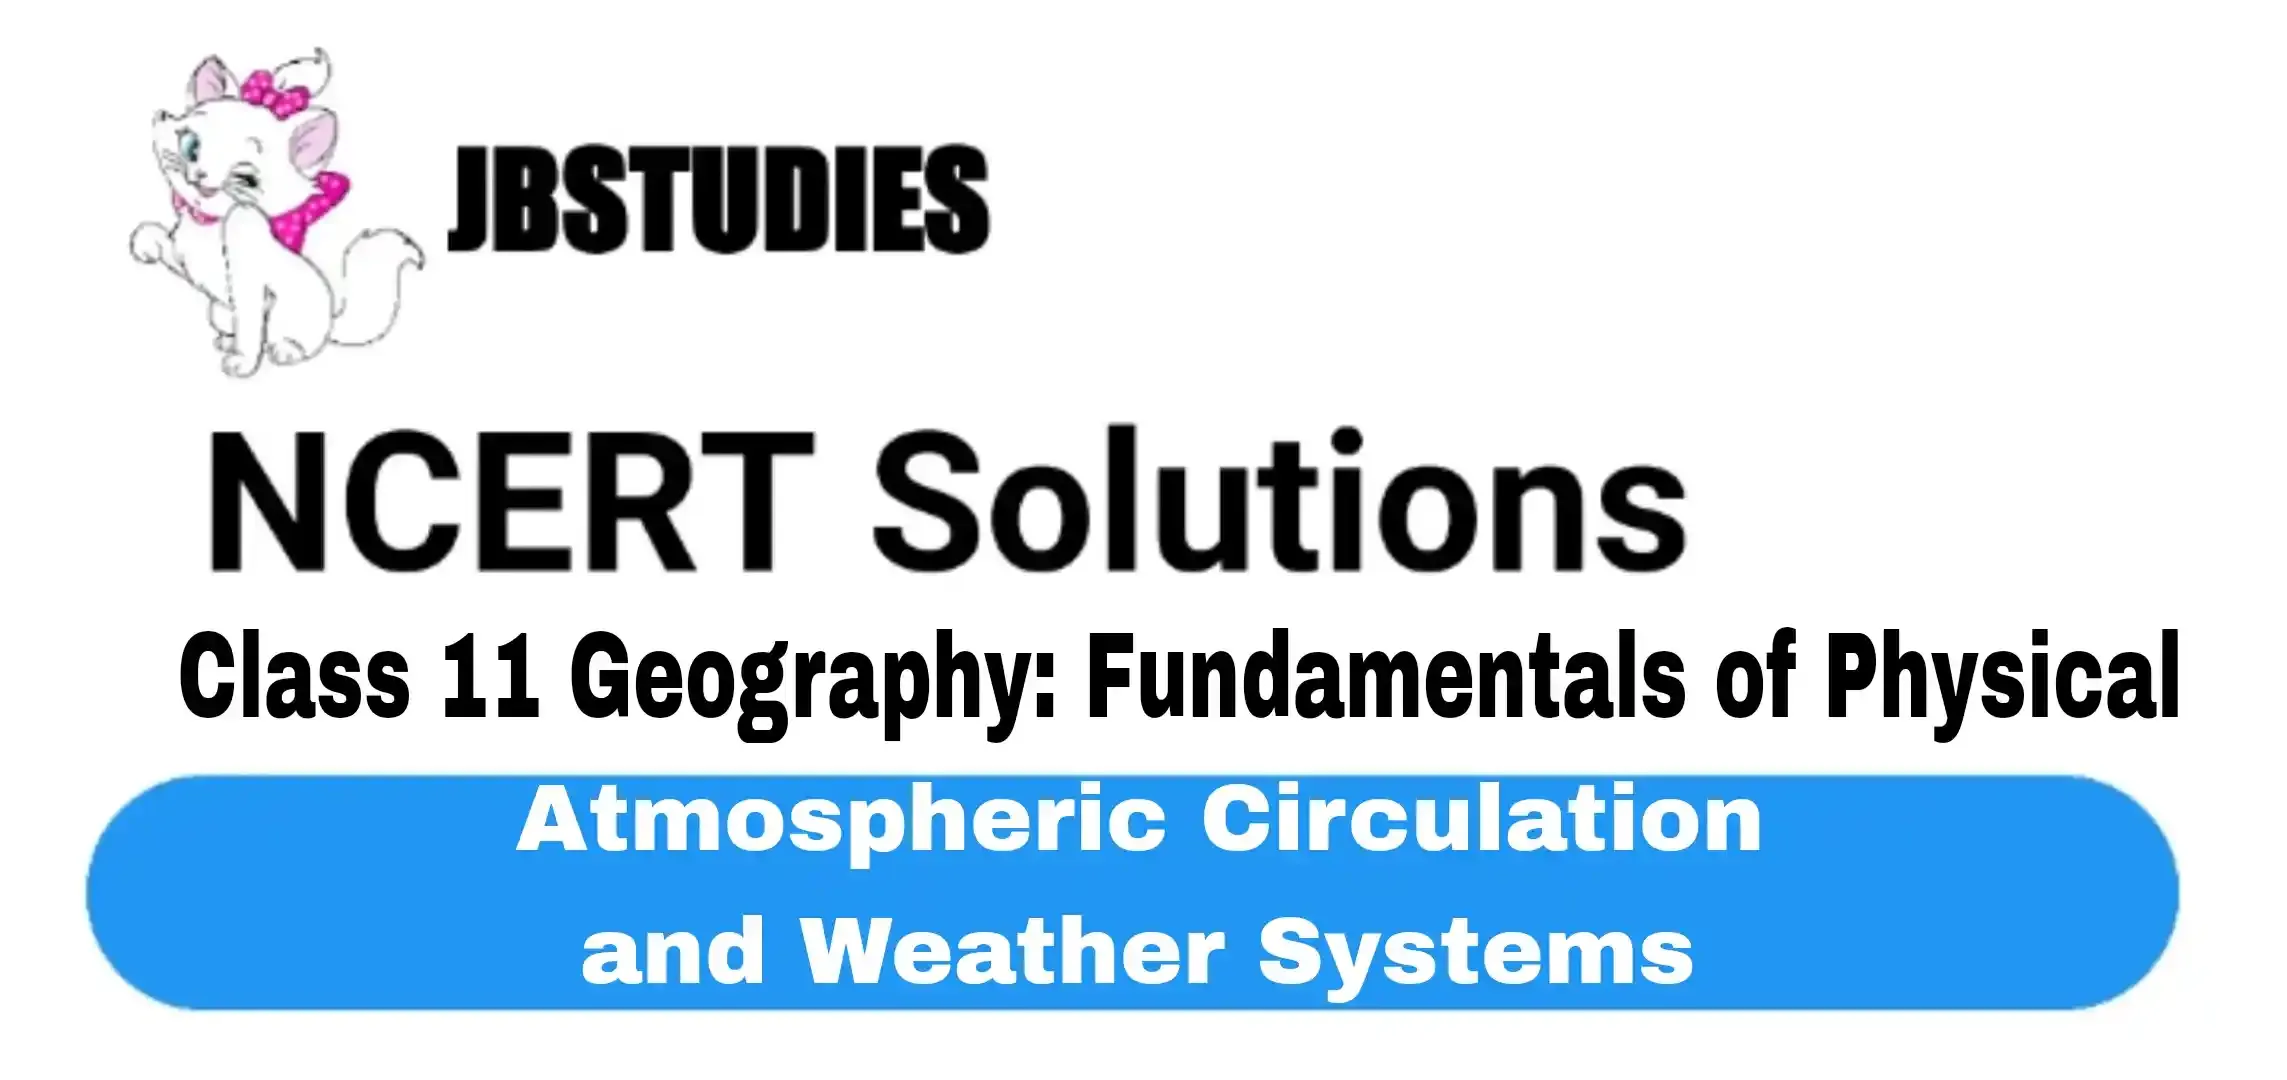 Solutions Class 11 Geography Chapter-10 Atmospheric Circulation and Weather Systems